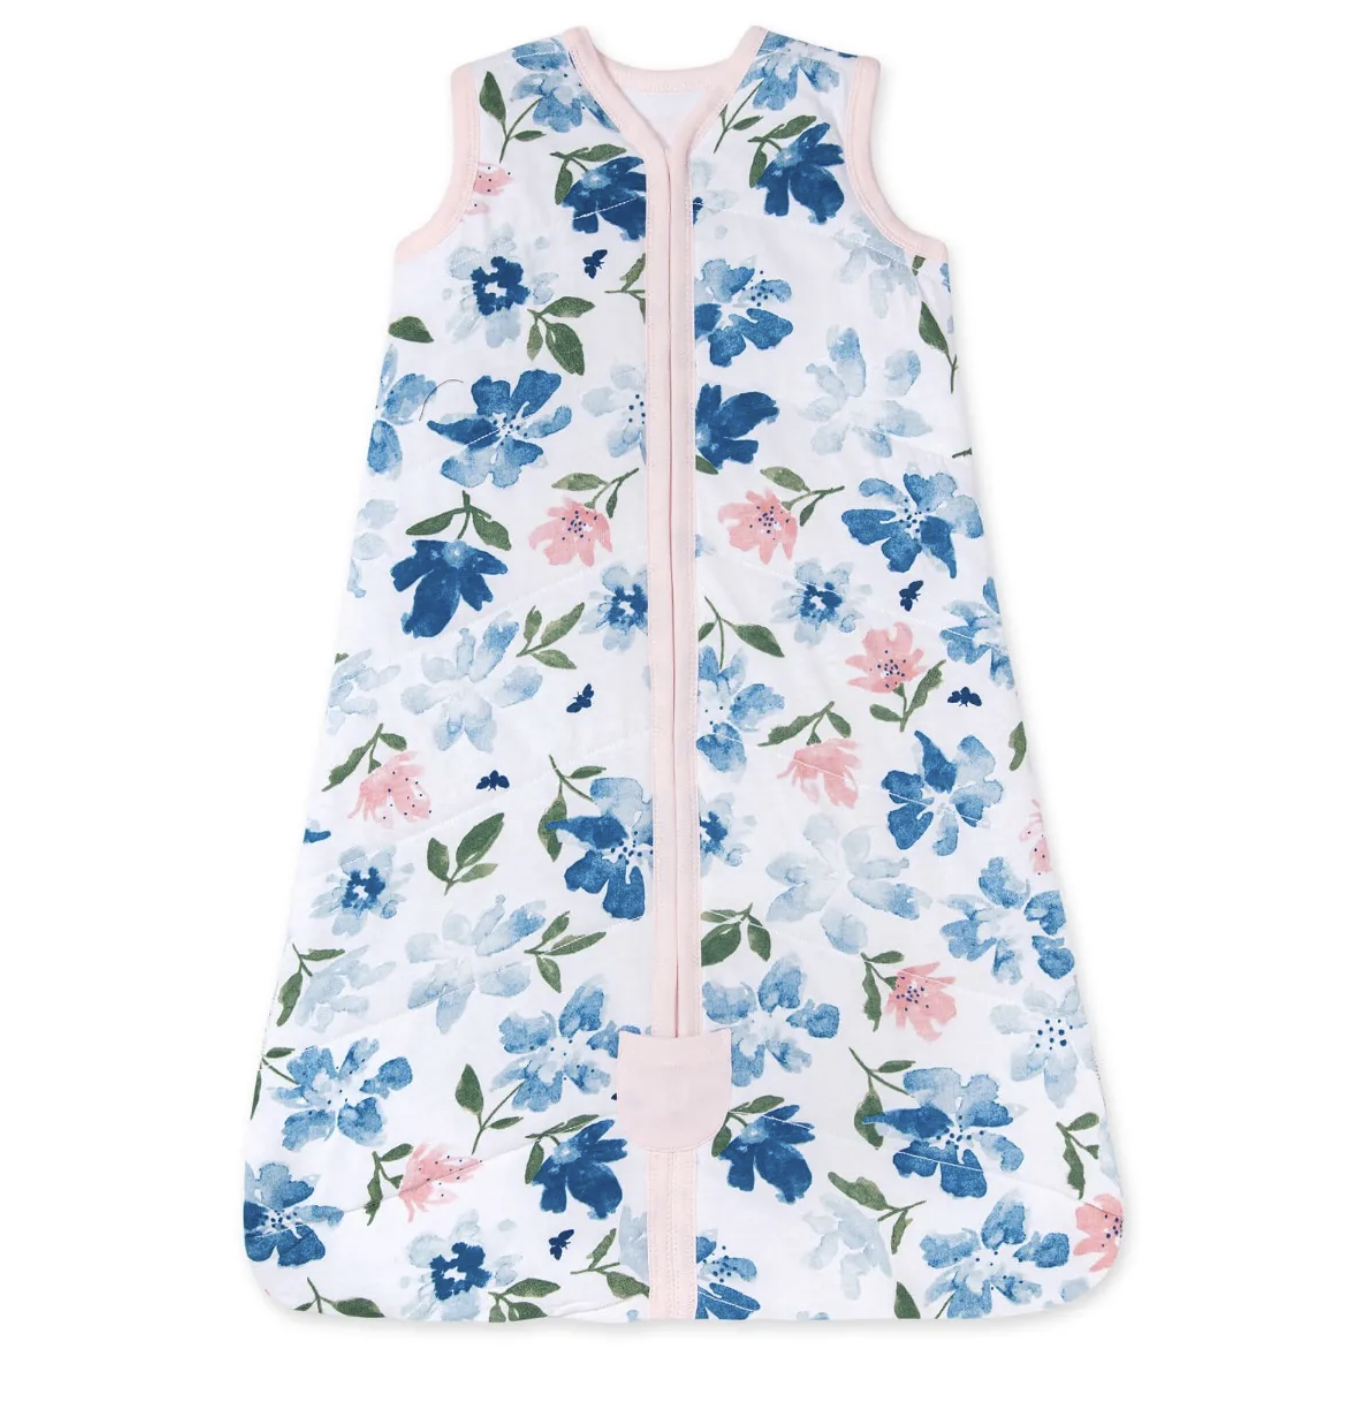 Best Baby Clothing Brands Burts Bees Wearable Blanket with floral design